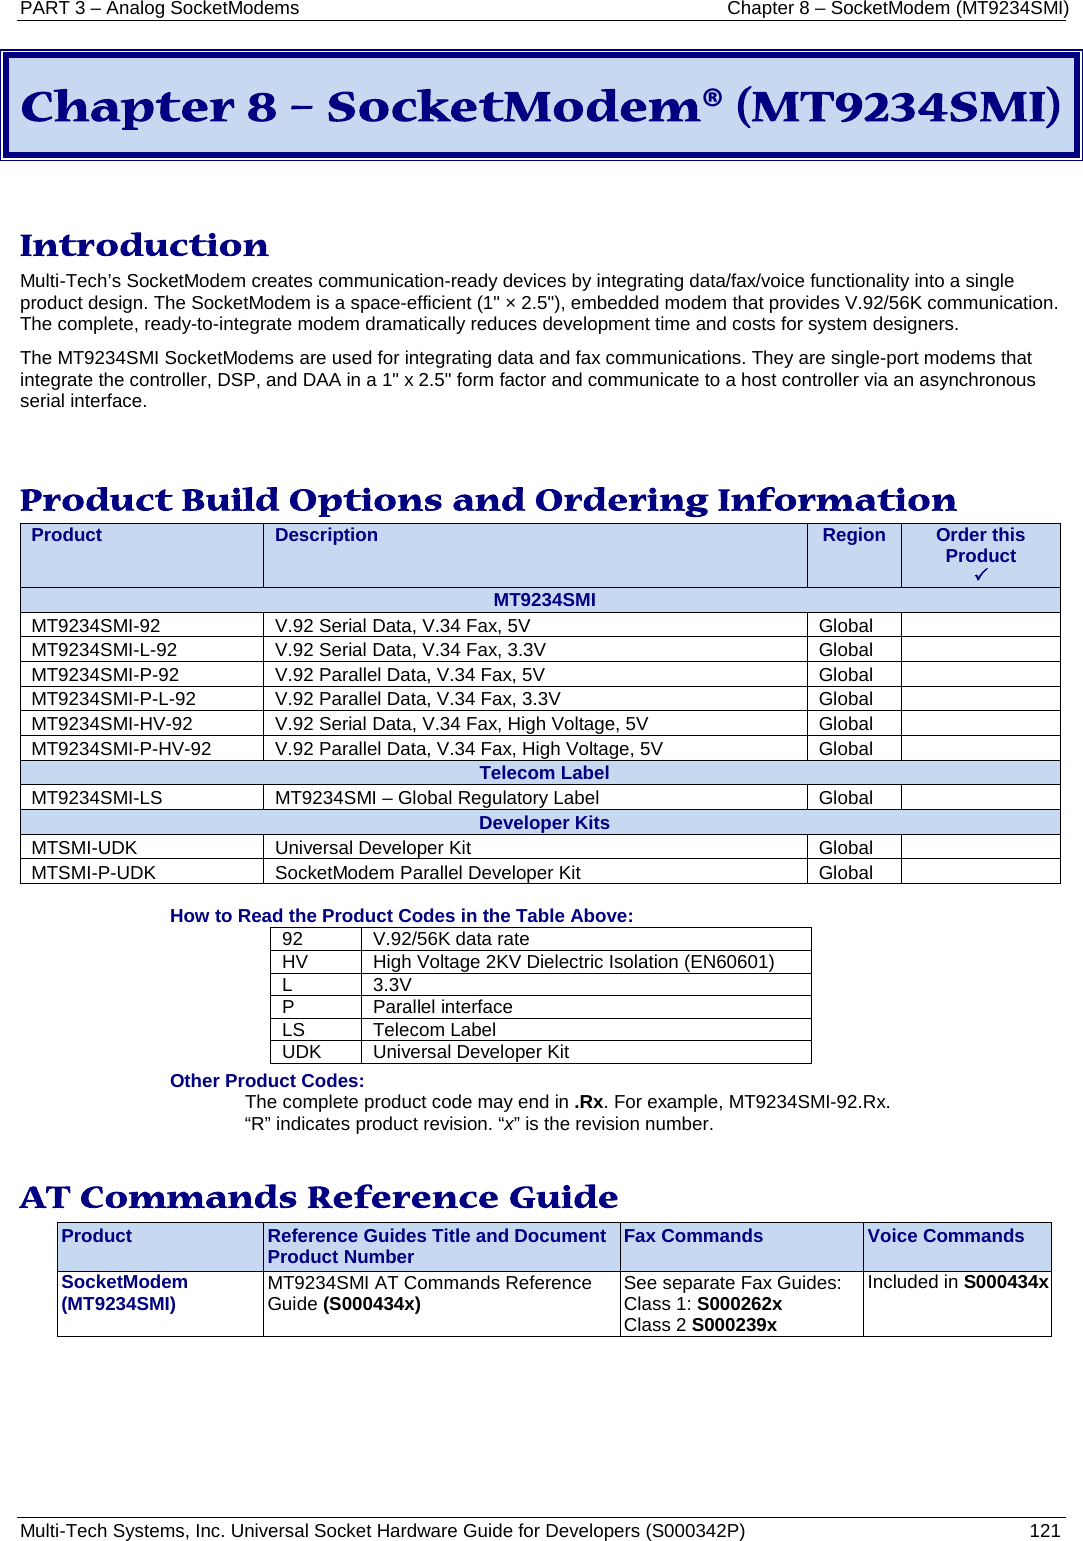 PART 3 – Analog SocketModems Chapter 8 – SocketModem (MT9234SMI) Multi-Tech Systems, Inc. Universal Socket Hardware Guide for Developers (S000342P)  121  Chapter 8 – SocketModem® (MT9234SMI)   Introduction Multi-Tech’s SocketModem creates communication-ready devices by integrating data/fax/voice functionality into a single product design. The SocketModem is a space-efficient (1&quot; × 2.5&quot;), embedded modem that provides V.92/56K communication. The complete, ready-to-integrate modem dramatically reduces development time and costs for system designers.  The MT9234SMI SocketModems are used for integrating data and fax communications. They are single-port modems that integrate the controller, DSP, and DAA in a 1&quot; x 2.5&quot; form factor and communicate to a host controller via an asynchronous serial interface.   Product Build Options and Ordering Information Product Description Region Order this Product  MT9234SMI MT9234SMI-92 V.92 Serial Data, V.34 Fax, 5V Global  MT9234SMI-L-92 V.92 Serial Data, V.34 Fax, 3.3V Global  MT9234SMI-P-92 V.92 Parallel Data, V.34 Fax, 5V Global  MT9234SMI-P-L-92 V.92 Parallel Data, V.34 Fax, 3.3V Global  MT9234SMI-HV-92 V.92 Serial Data, V.34 Fax, High Voltage, 5V Global  MT9234SMI-P-HV-92 V.92 Parallel Data, V.34 Fax, High Voltage, 5V Global  Telecom Label MT9234SMI-LS MT9234SMI – Global Regulatory Label Global  Developer Kits MTSMI-UDK Universal Developer Kit Global  MTSMI-P-UDK SocketModem Parallel Developer Kit Global   How to Read the Product Codes in the Table Above: 92 V.92/56K data rate HV High Voltage 2KV Dielectric Isolation (EN60601) L  3.3V P Parallel interface LS Telecom Label UDK Universal Developer Kit Other Product Codes: The complete product code may end in .Rx. For example, MT9234SMI-92.Rx.   “R” indicates product revision. “x” is the revision number.  AT Commands Reference Guide Product Reference Guides Title and Document Product Number Fax Commands Voice Commands SocketModem (MT9234SMI) MT9234SMI AT Commands Reference Guide (S000434x) See separate Fax Guides: Class 1: S000262x Class 2 S000239x Included in S000434x    